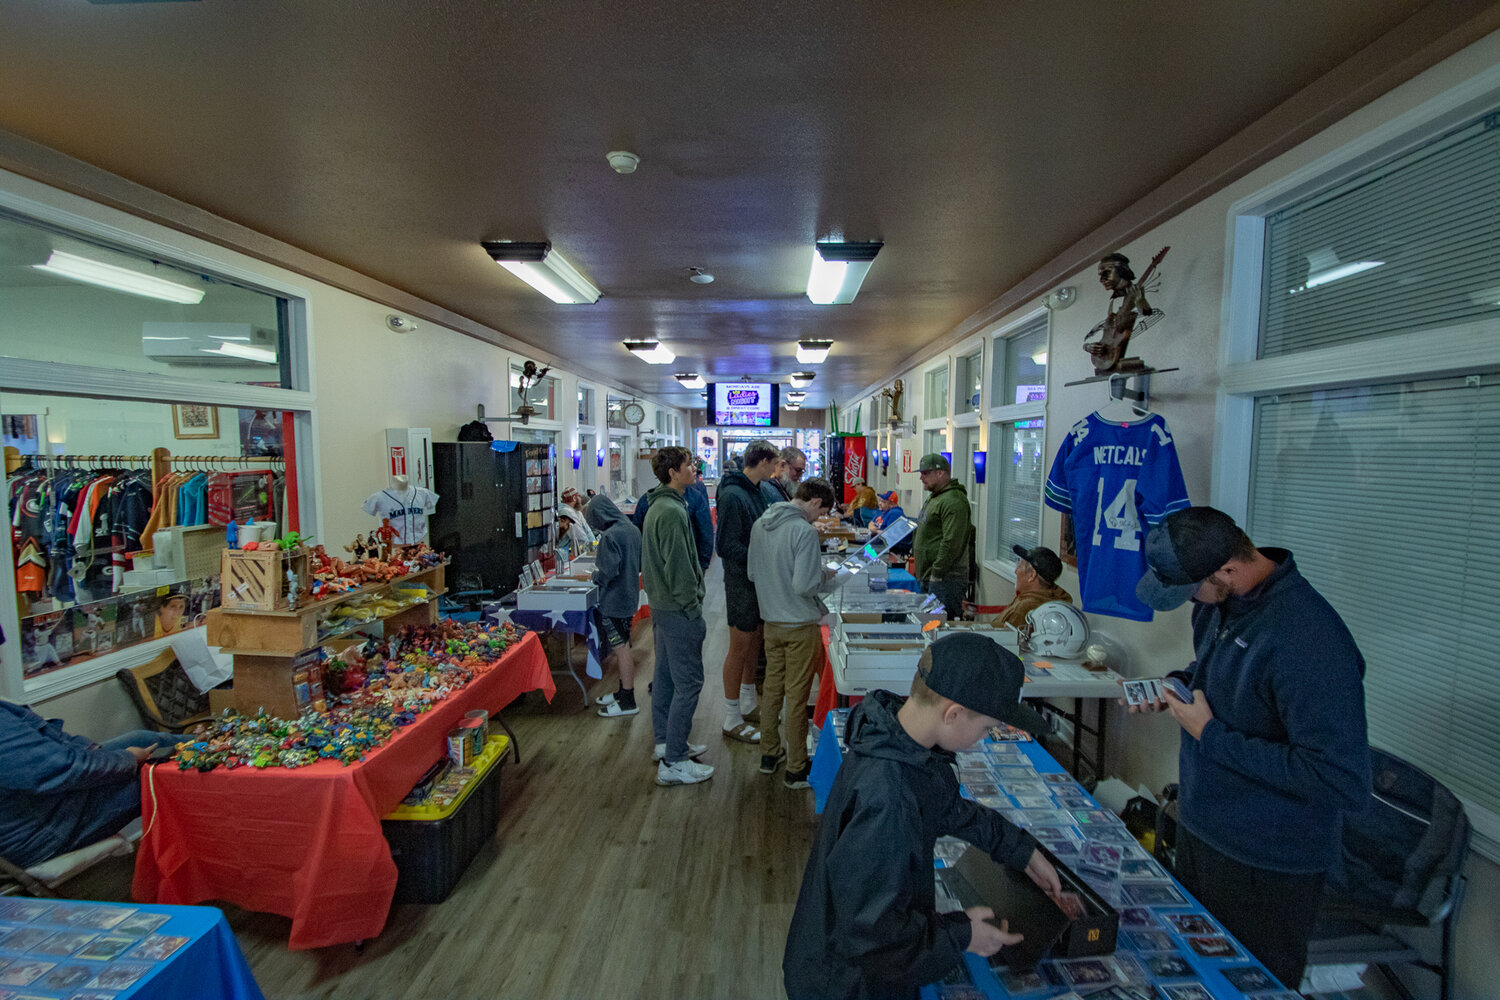 Attendees browse vendor selections during the second Keiper's Cards and Memorabilia Show on Saturday, Dec. 2, in the Tower Plaza Mall in downtown Centralia.